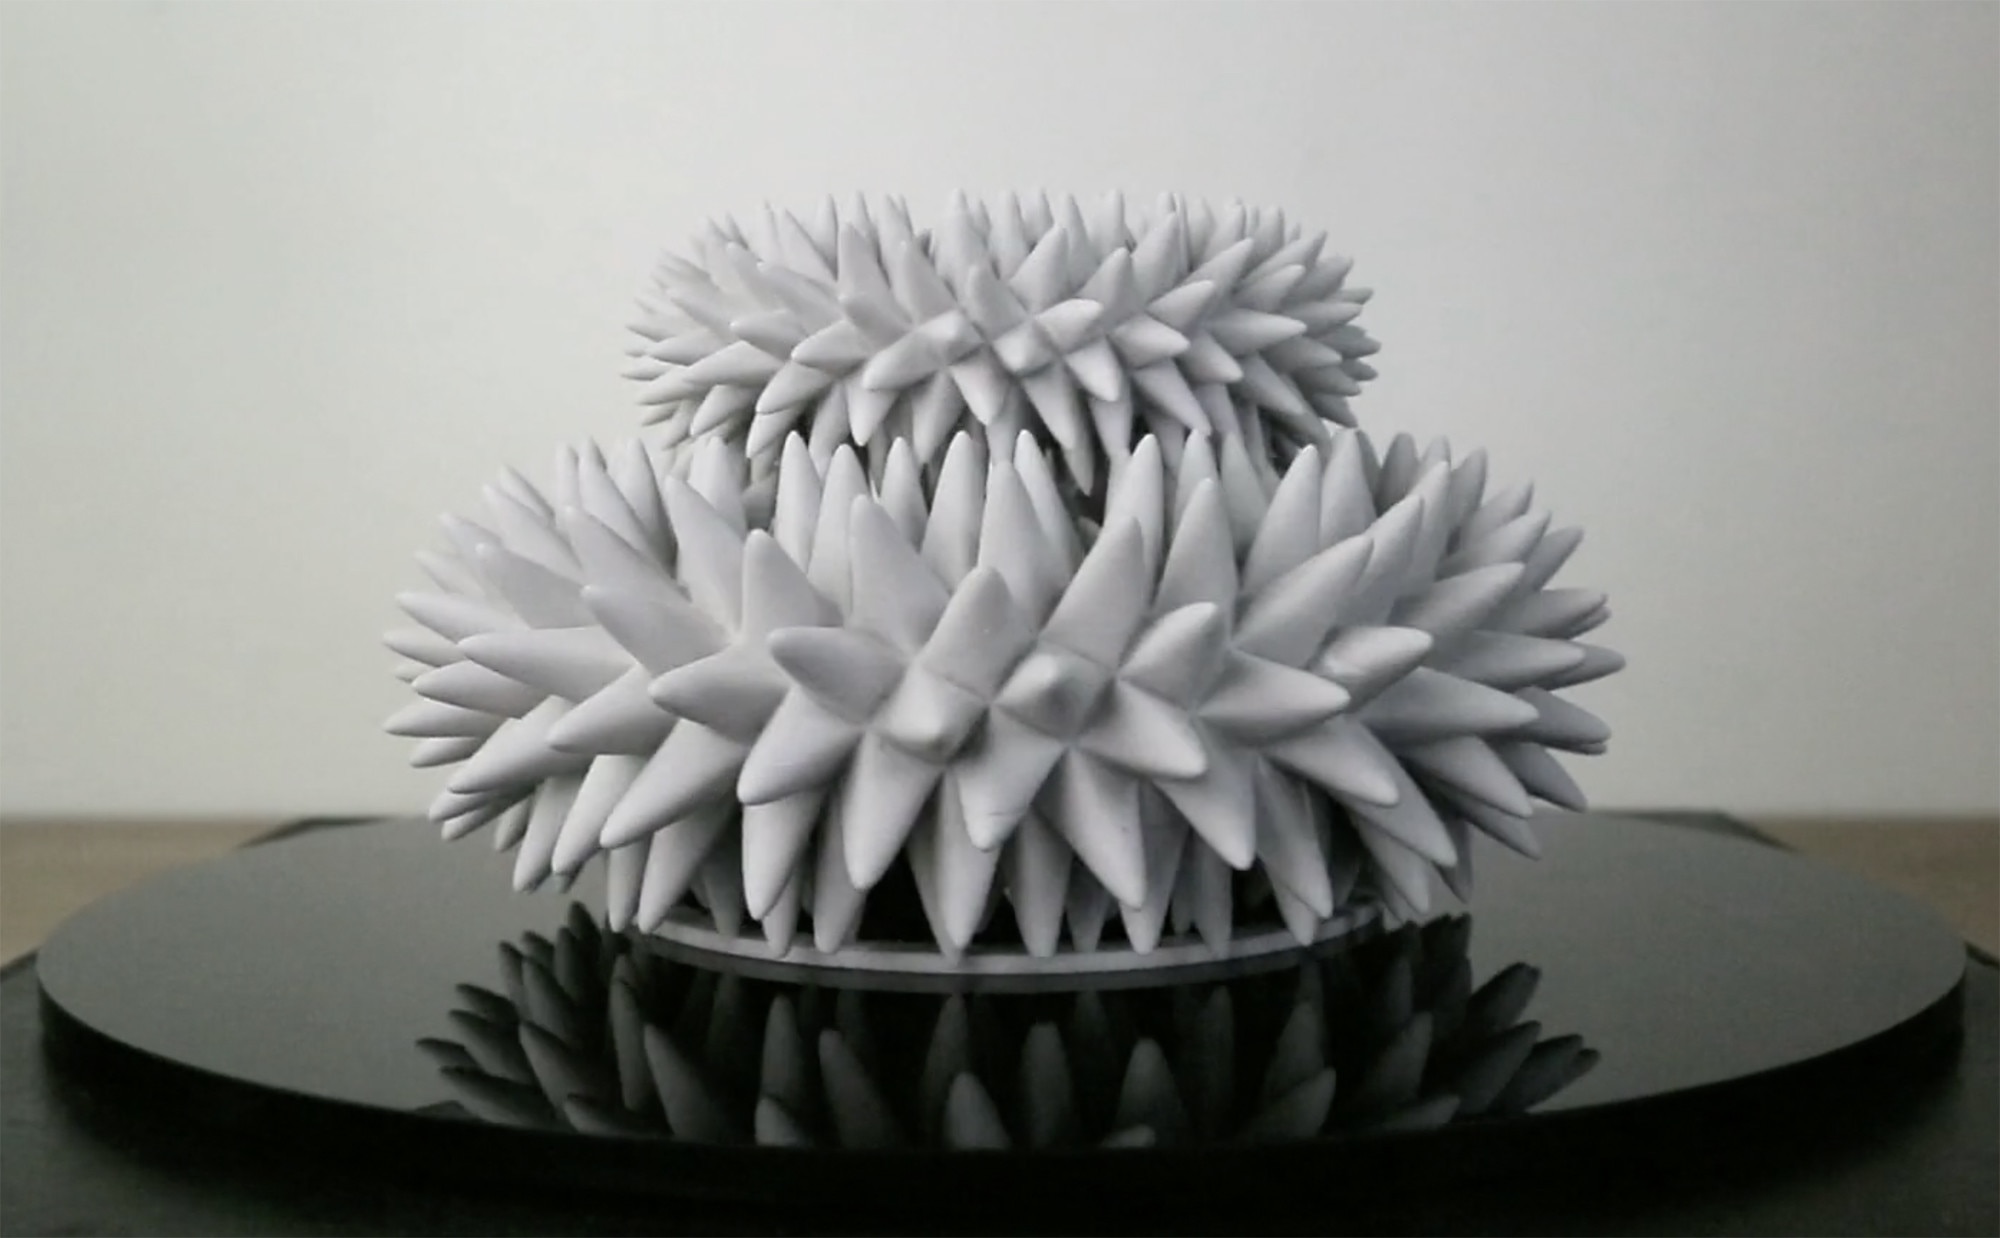 A 3D printed sculpture appears to wiggle and move when spun and lit by a strobe light on video. Credit: John Edmark, from the video